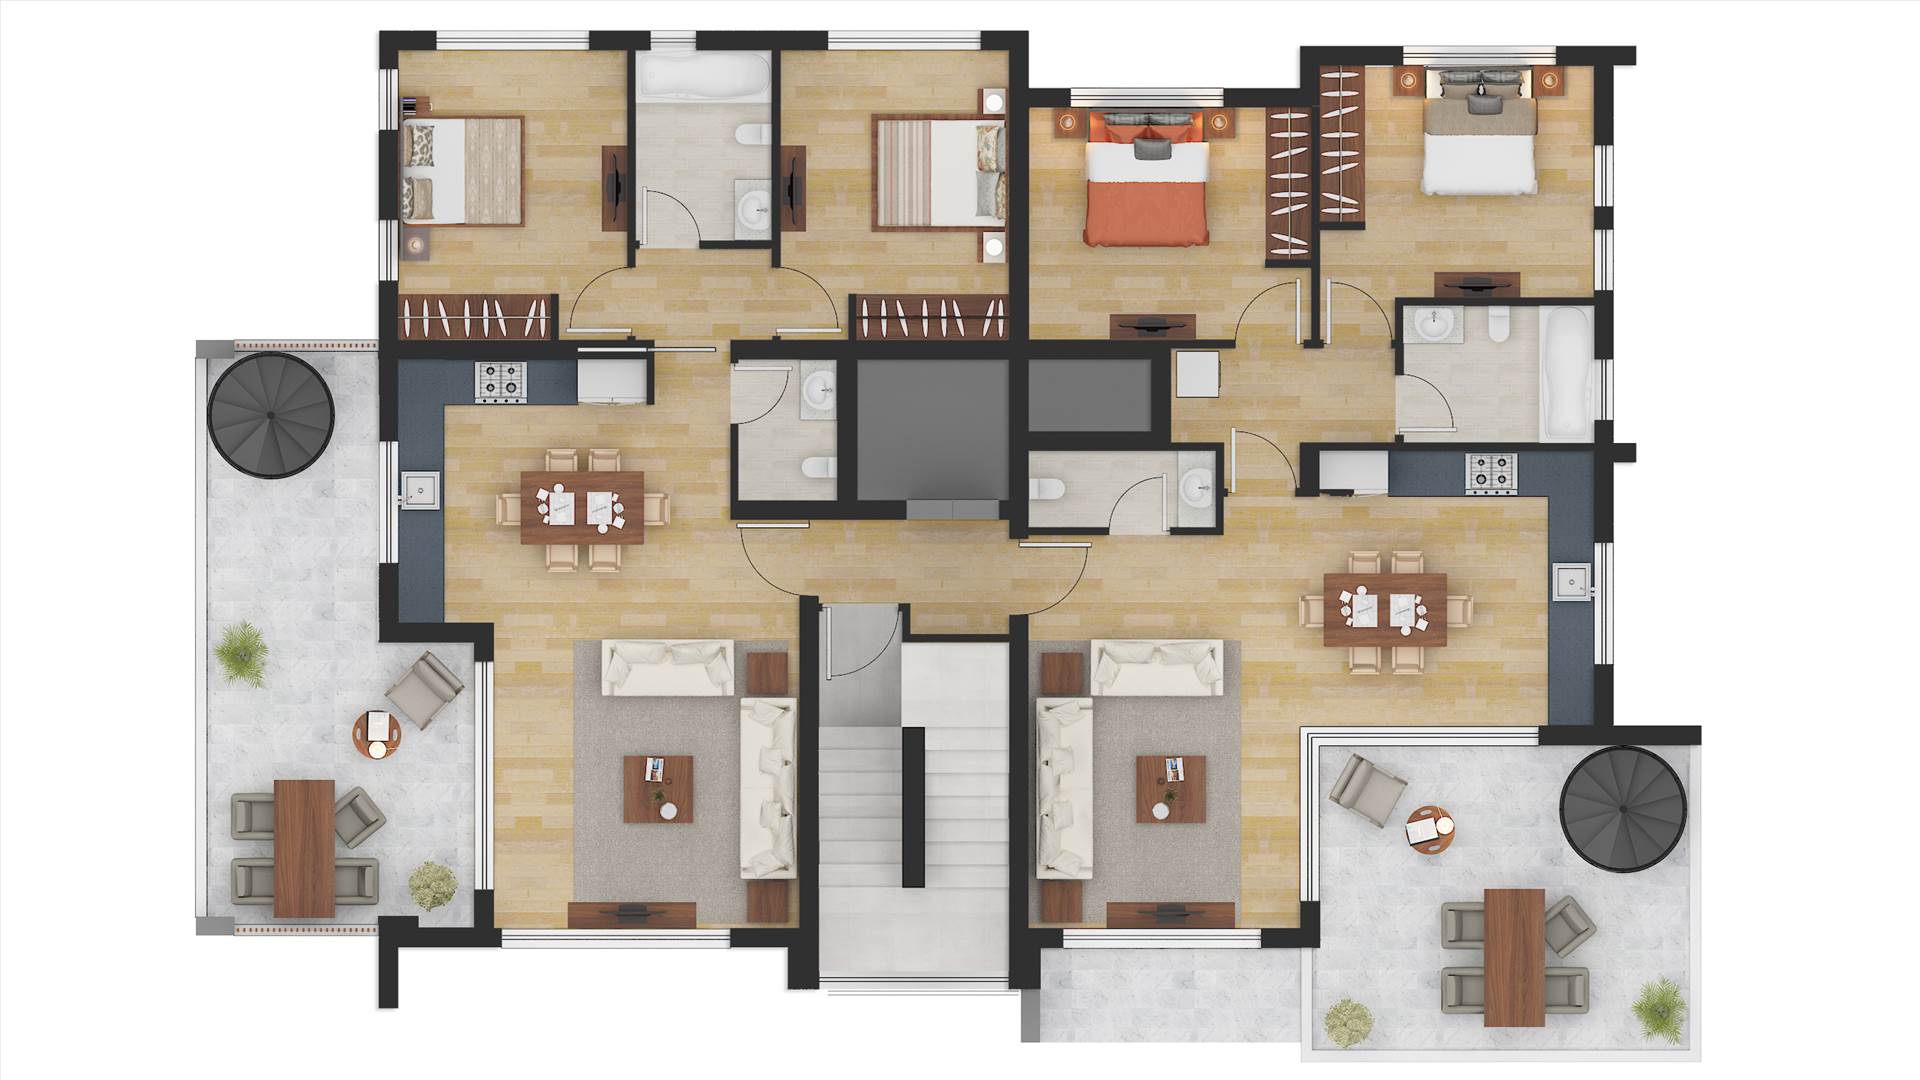 Color Floor Plan Rendering Services Los Angeles CA 2D Floor Plan Rendering Services Los Angeles CA idea with floor, Sections & elevation. We can deliver it with texture furniture and landscape detail. by JMSDCONSULTANT